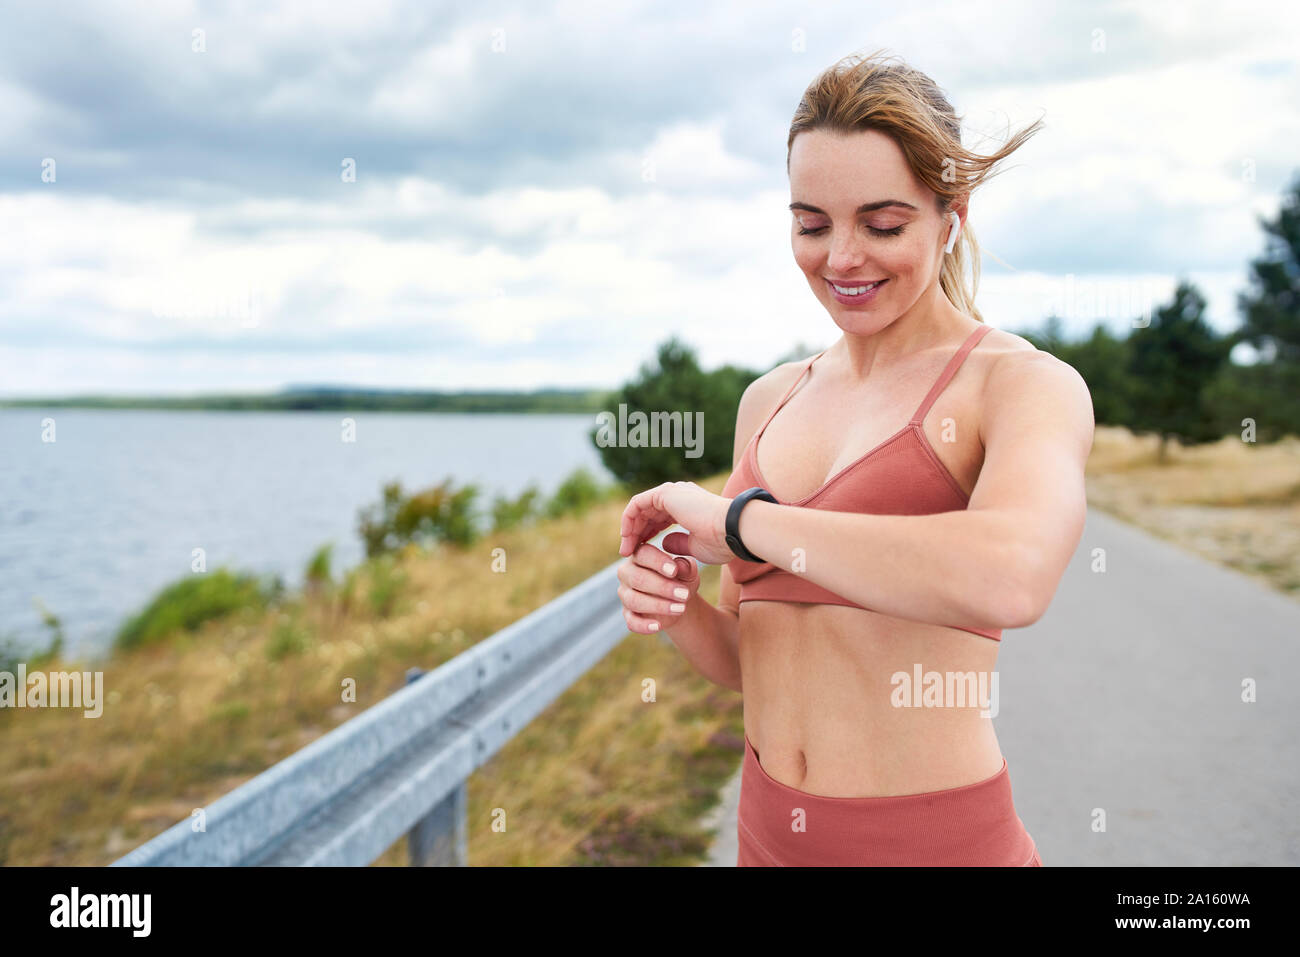 Portrait of fit woman checking smartwatch during outdoor jogging session Stock Photo